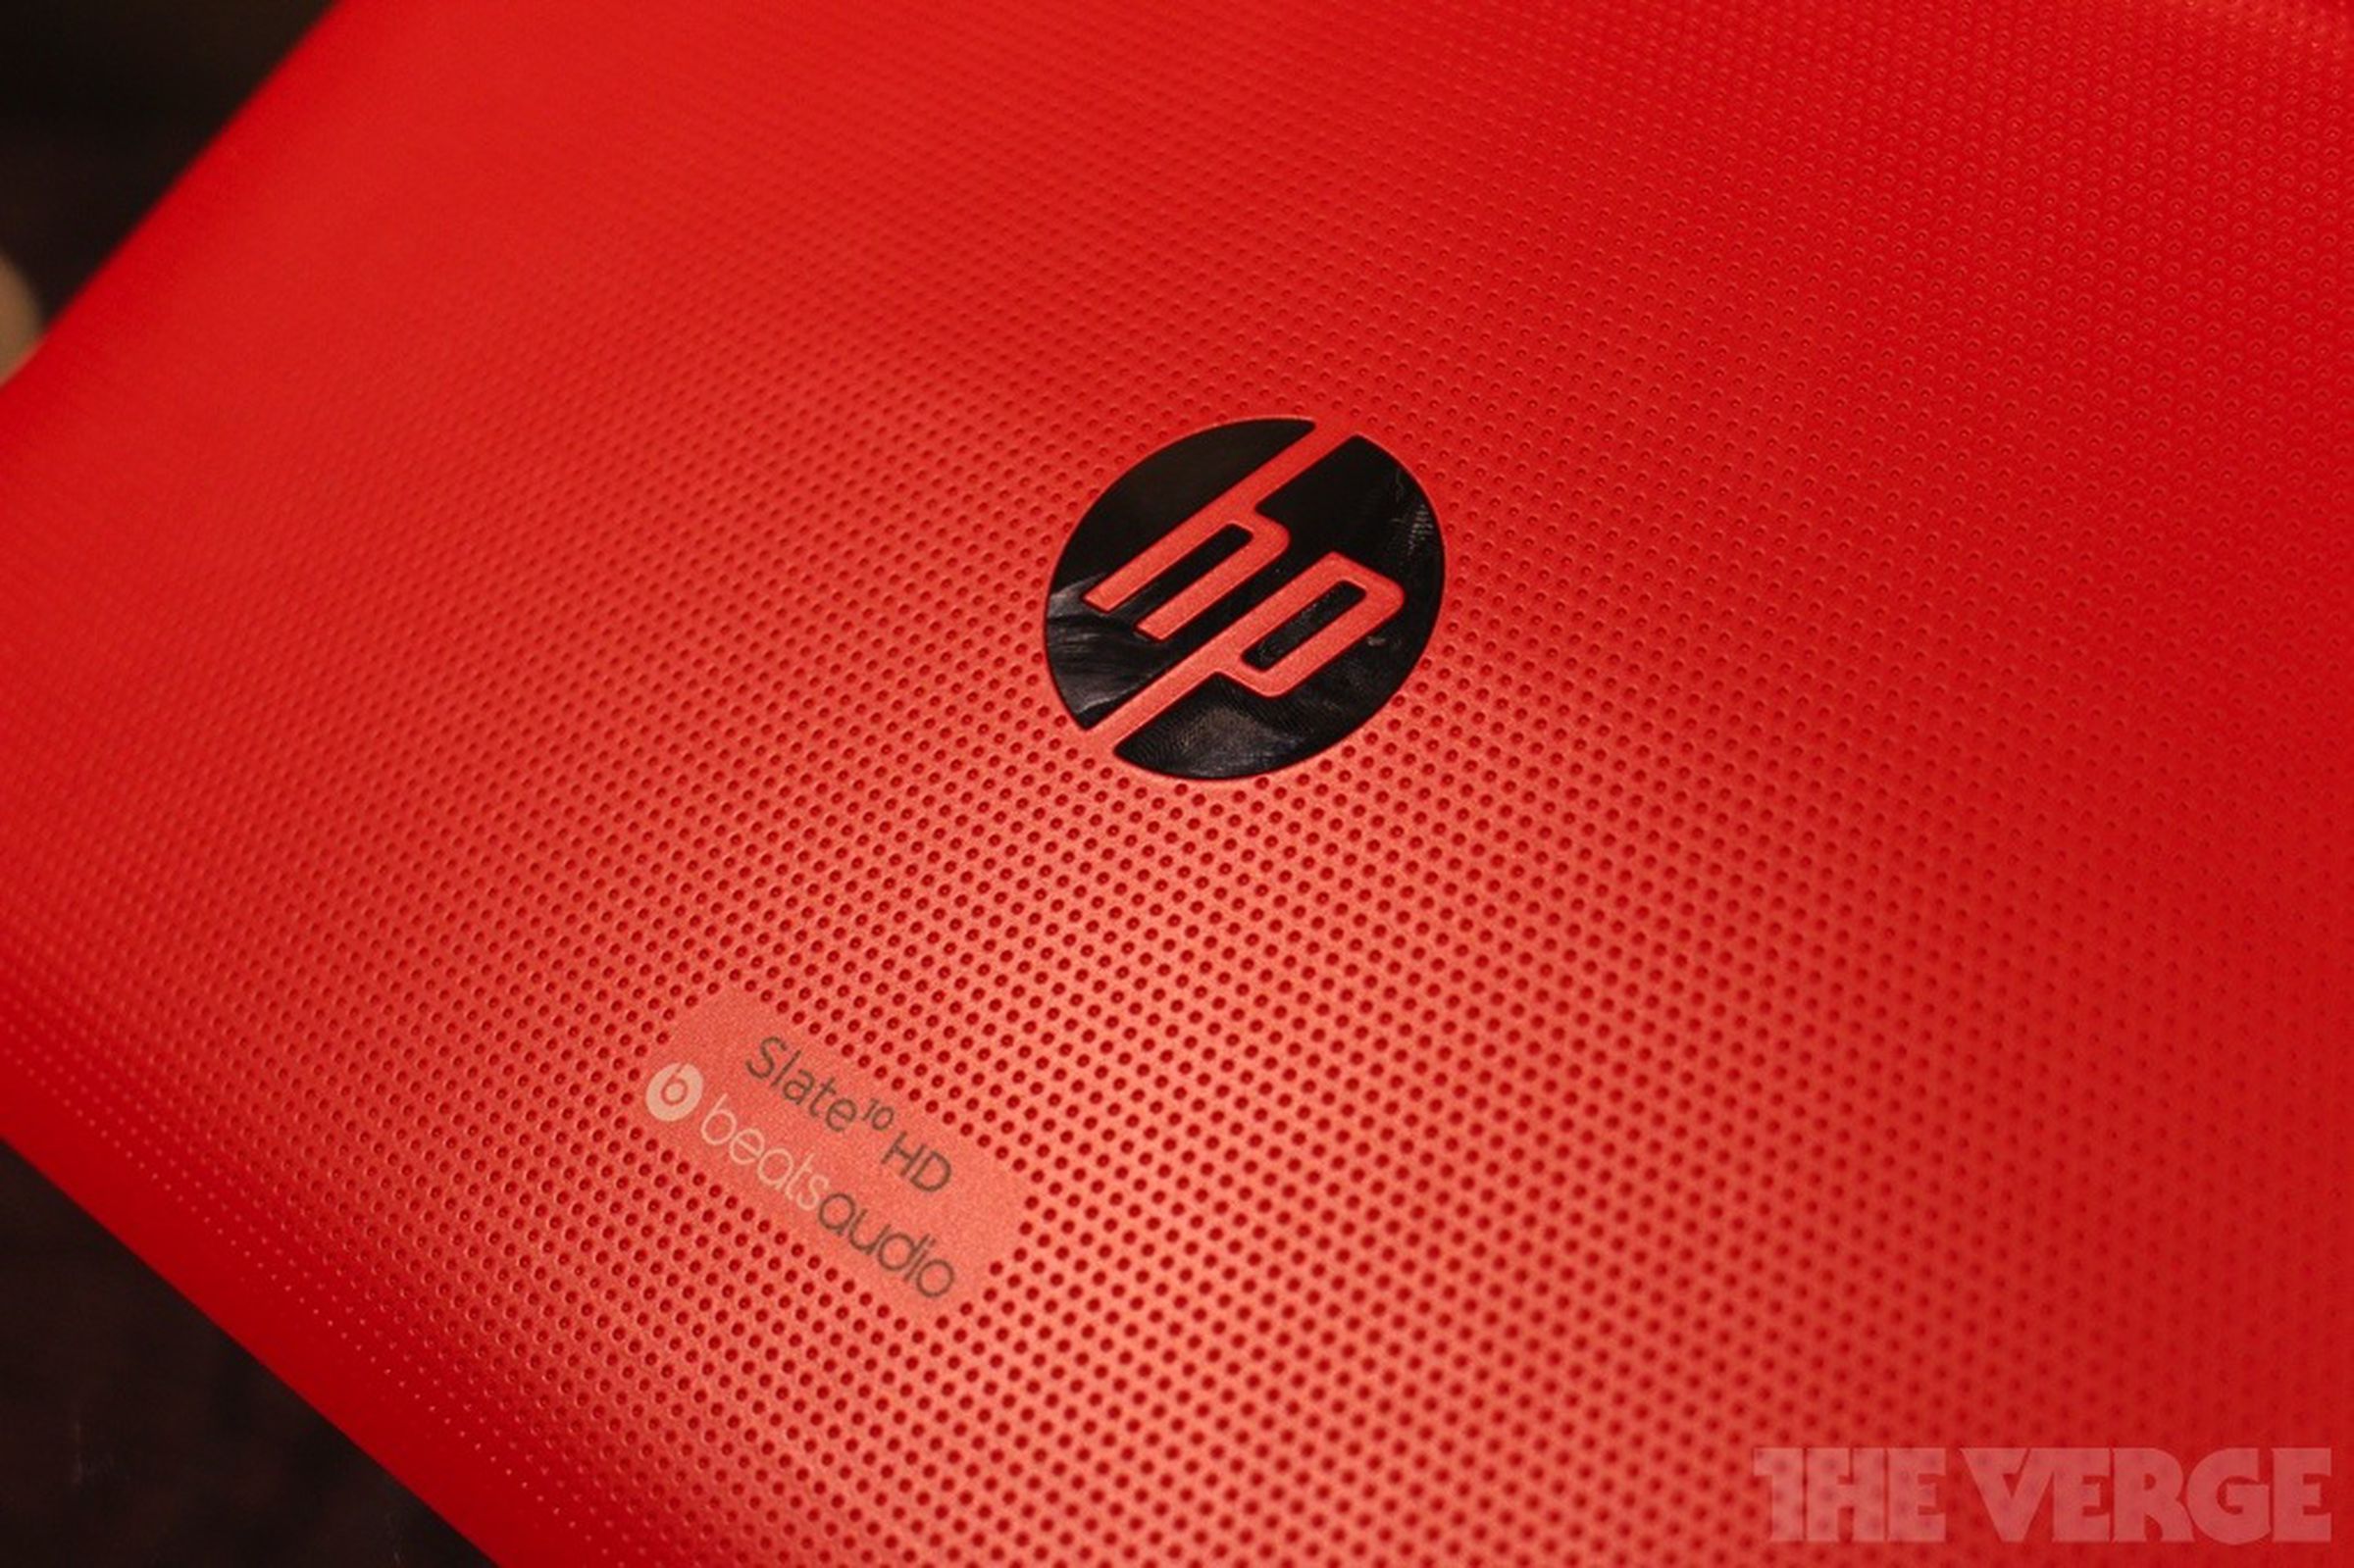 HP Slate and Omni tablet hands-on pictures